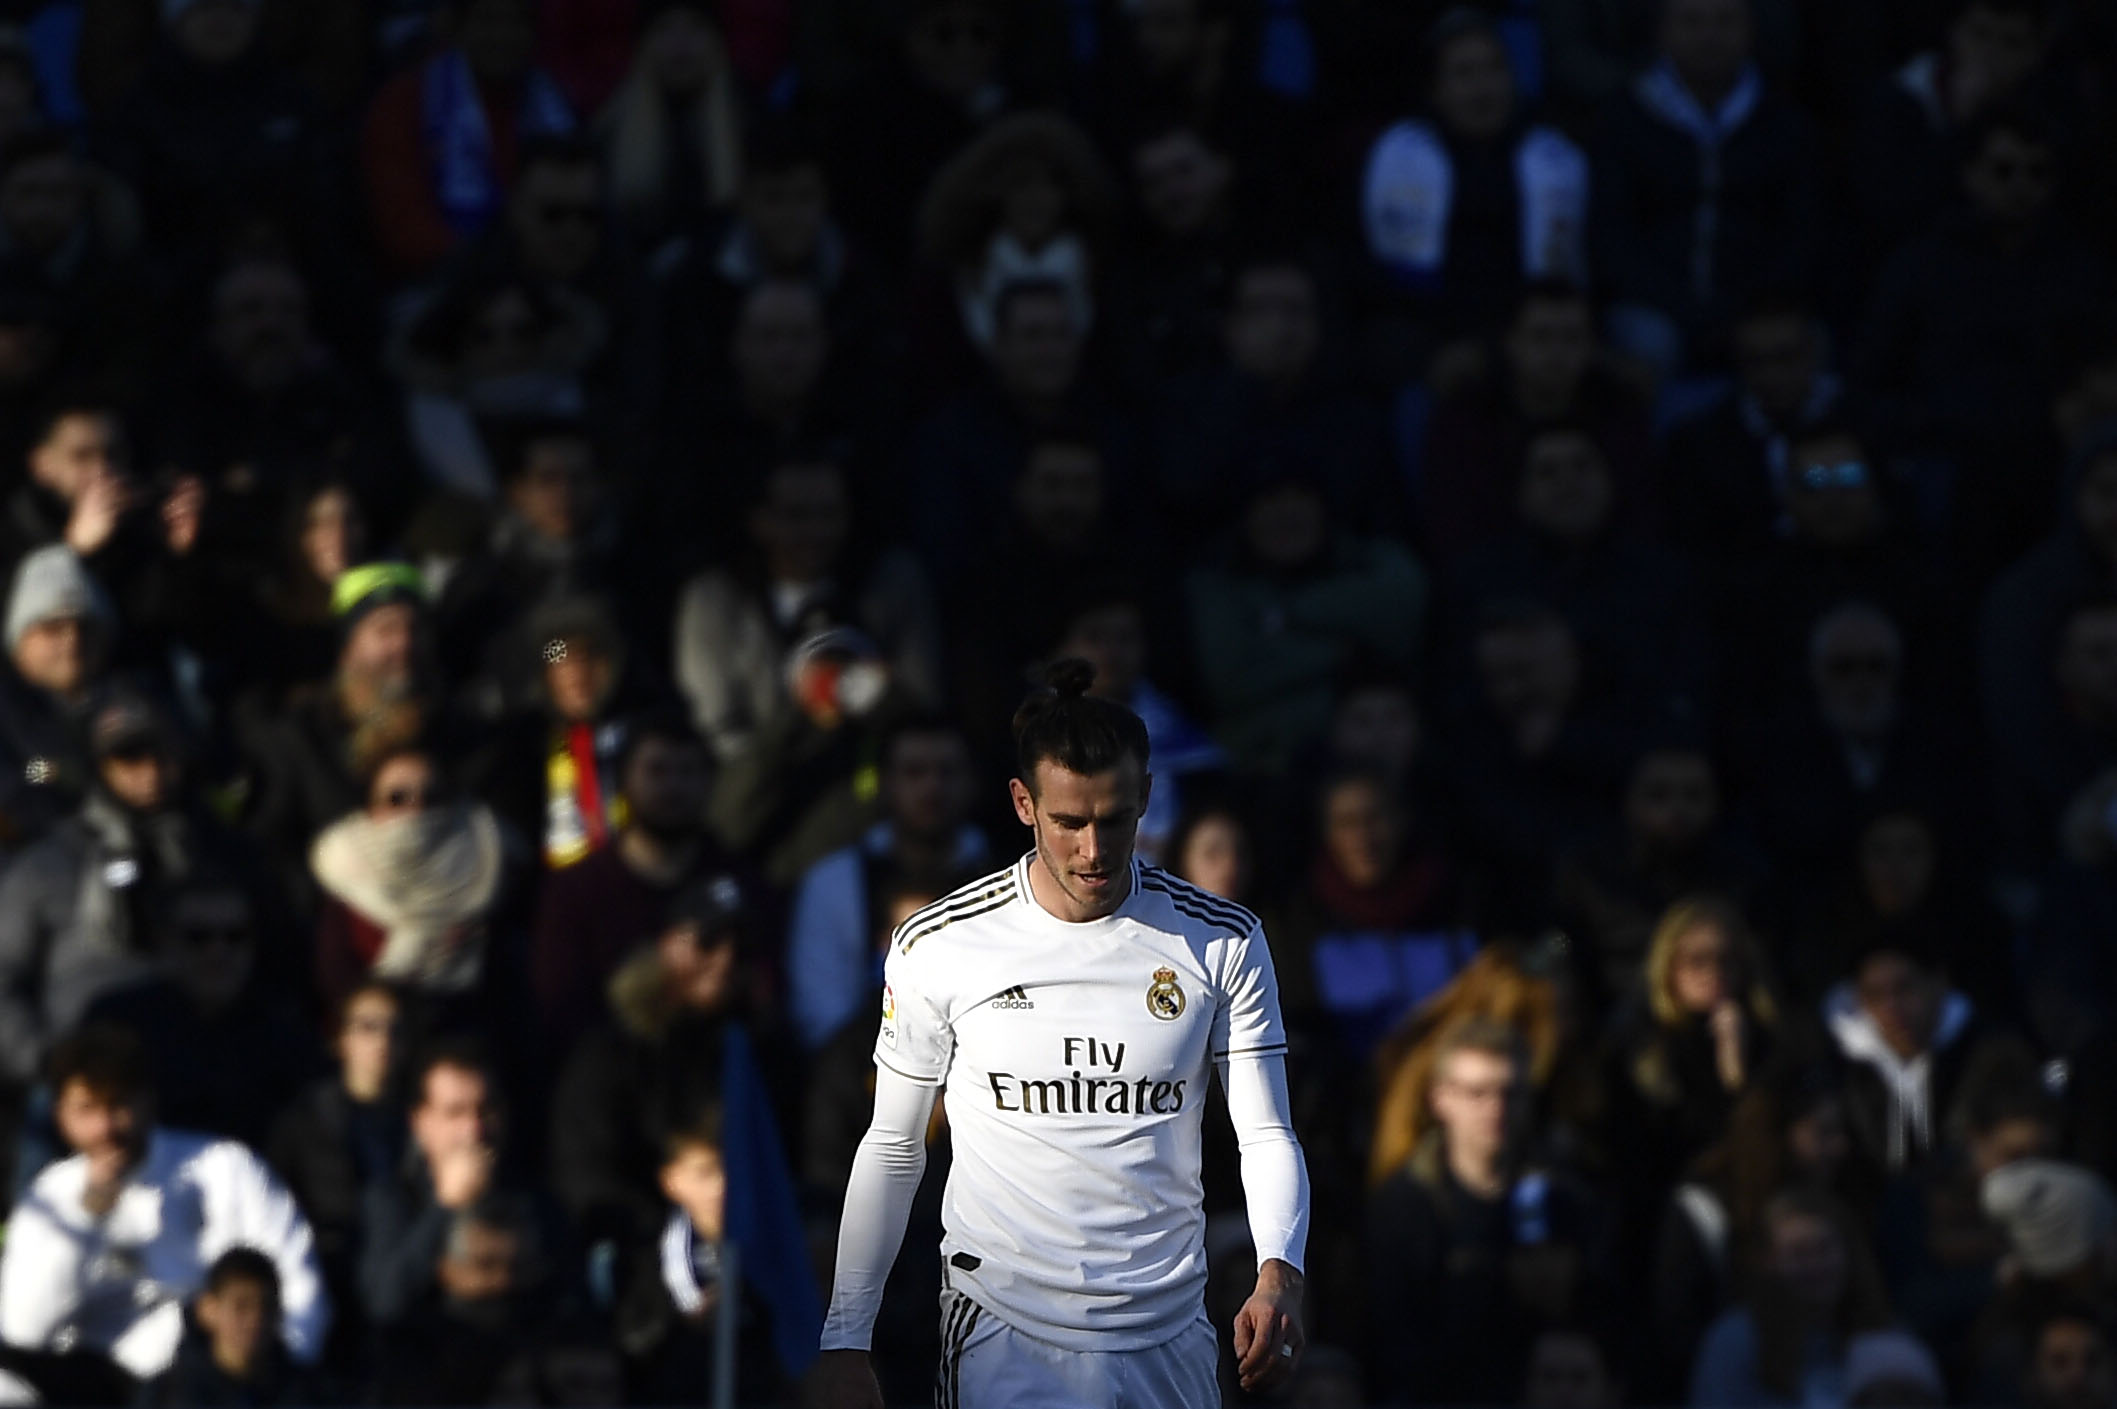 Will Bale come out of the shadows to get his career back on track? (Photo by Oscar del Pozo/AFP via Getty Images)